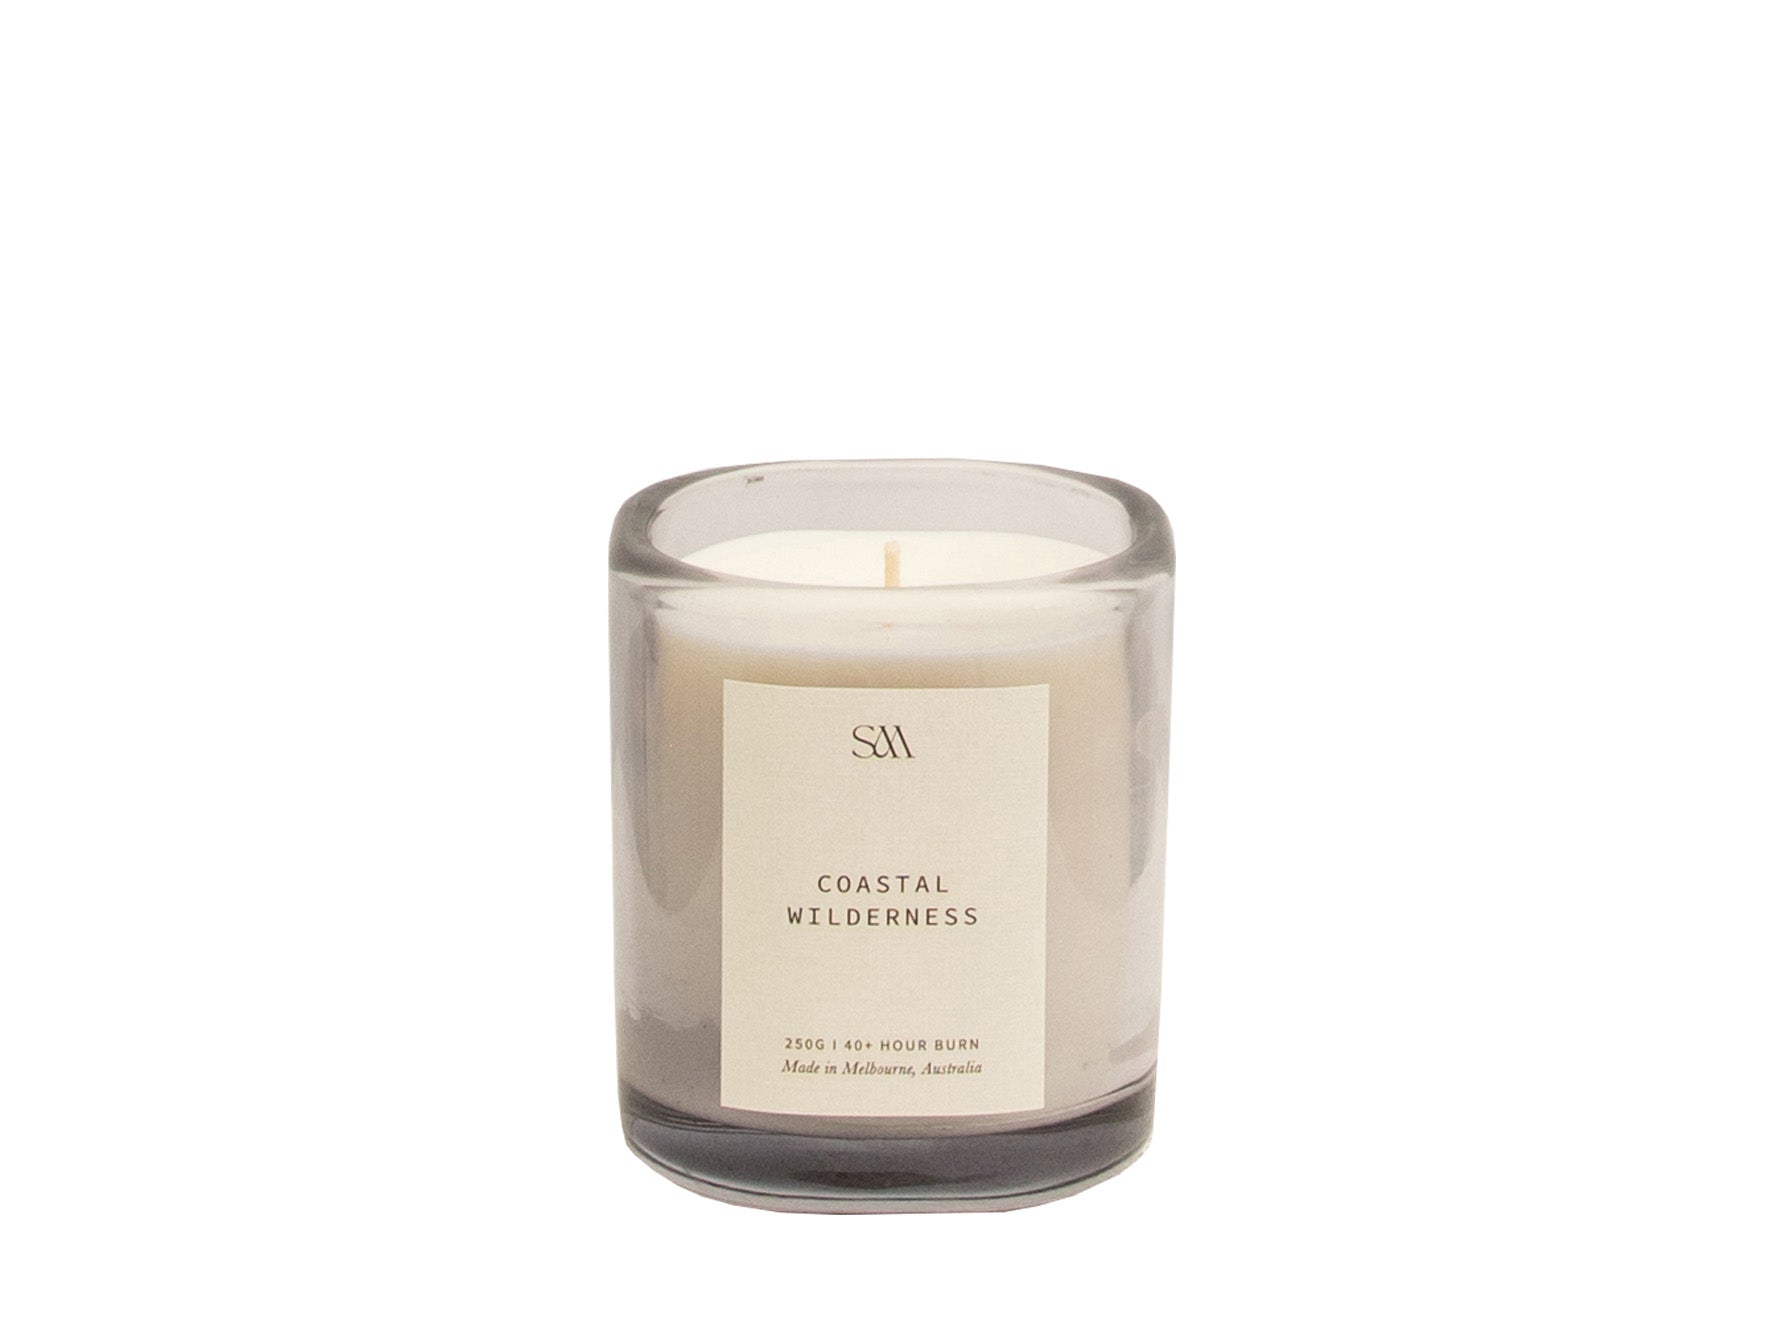 Coastal Wilderness 250g Signature Scented Candle